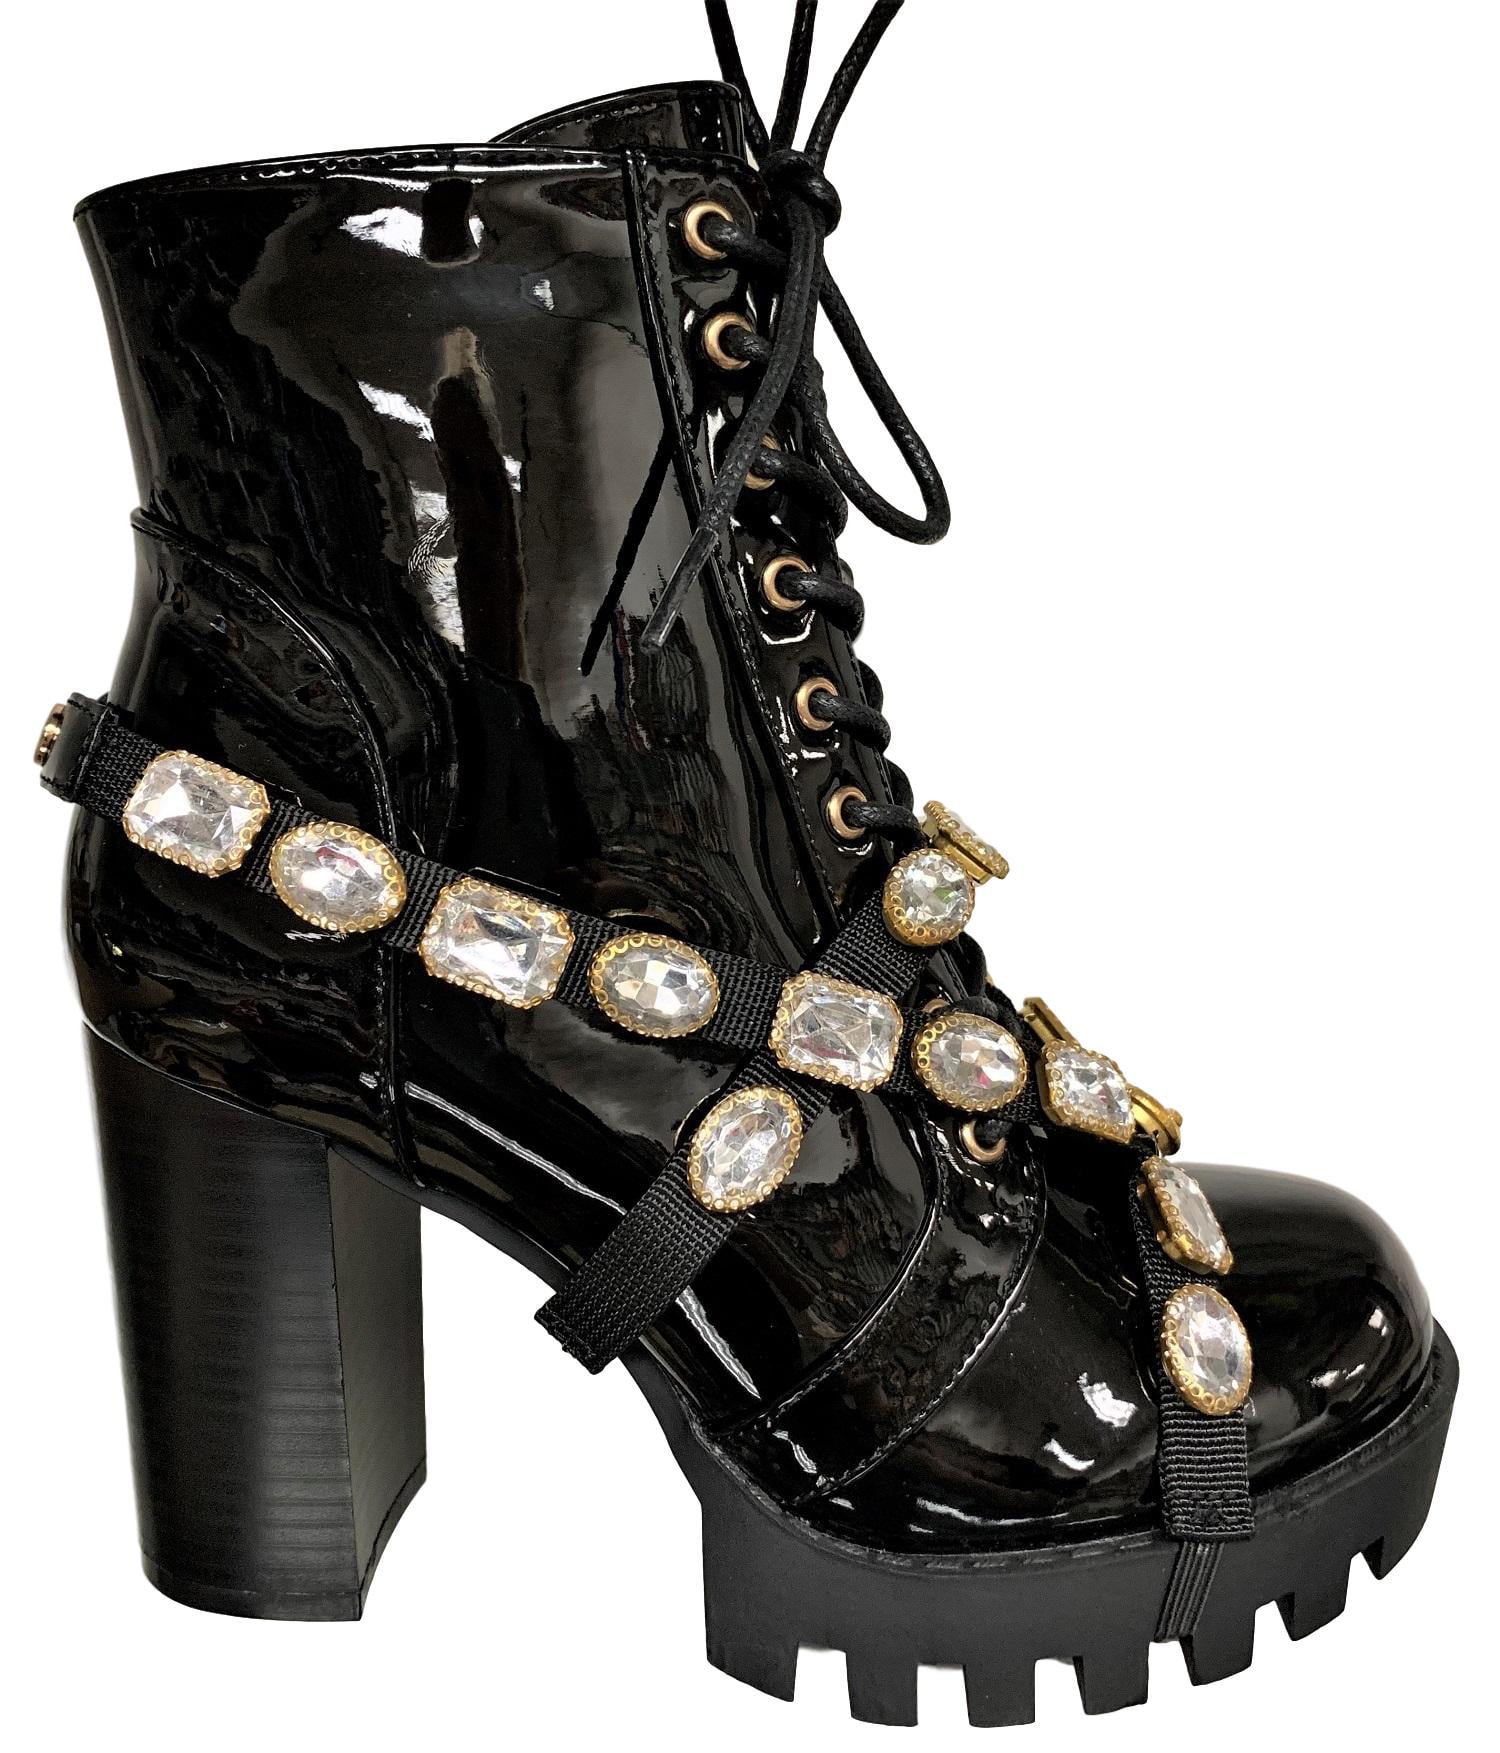 RQWEIN Womens Leather Military Up Buckle Combat Boots with Mid-Heel Leisure Rome Square Med Heels Short Booties Shoes 